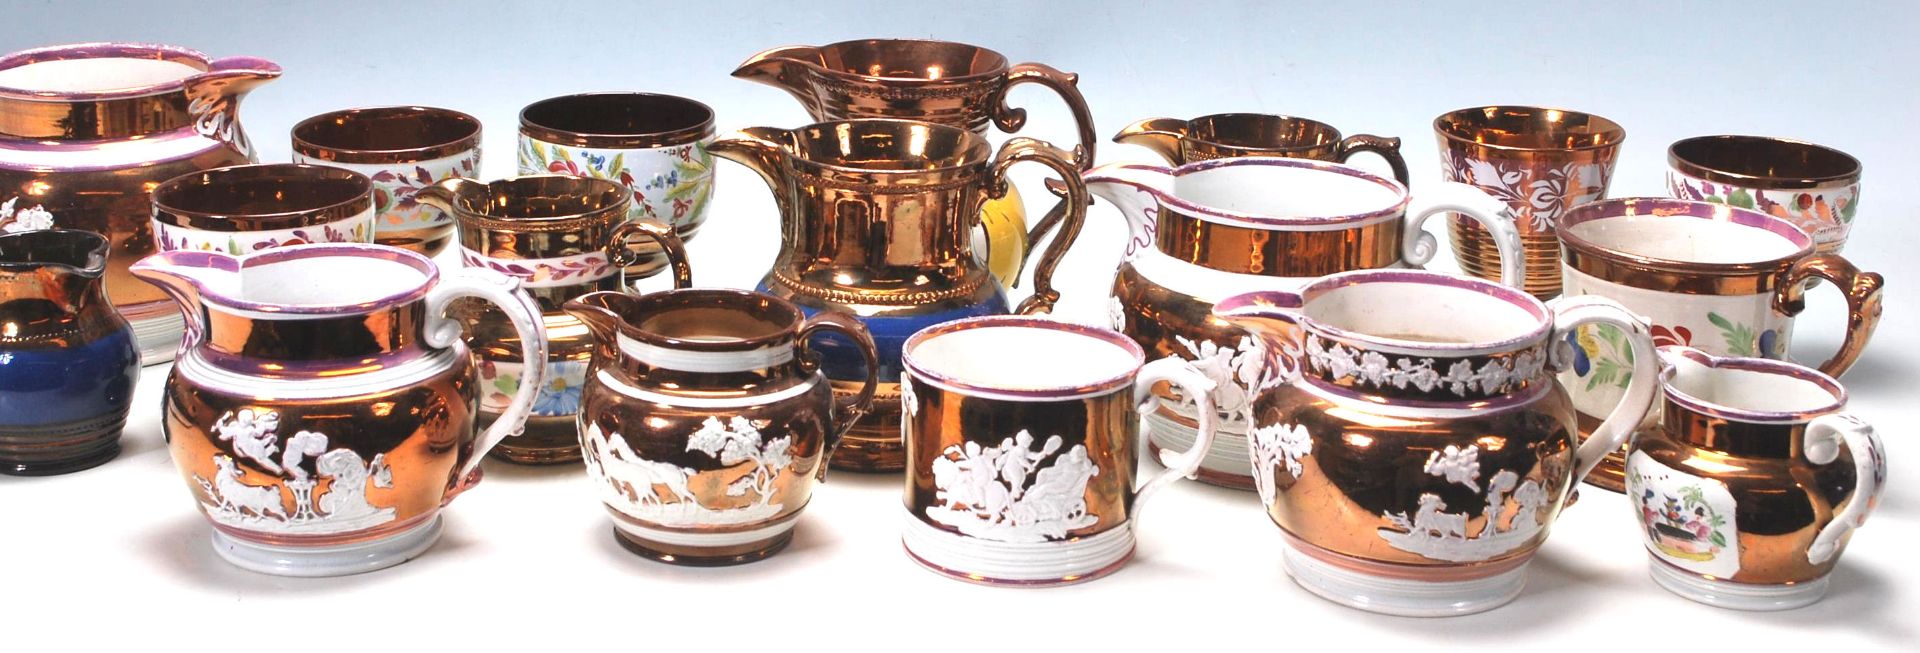 LARGE COLLECTION OF VICTORIAN 19TH CENTURY COPPER LUSTREWARE